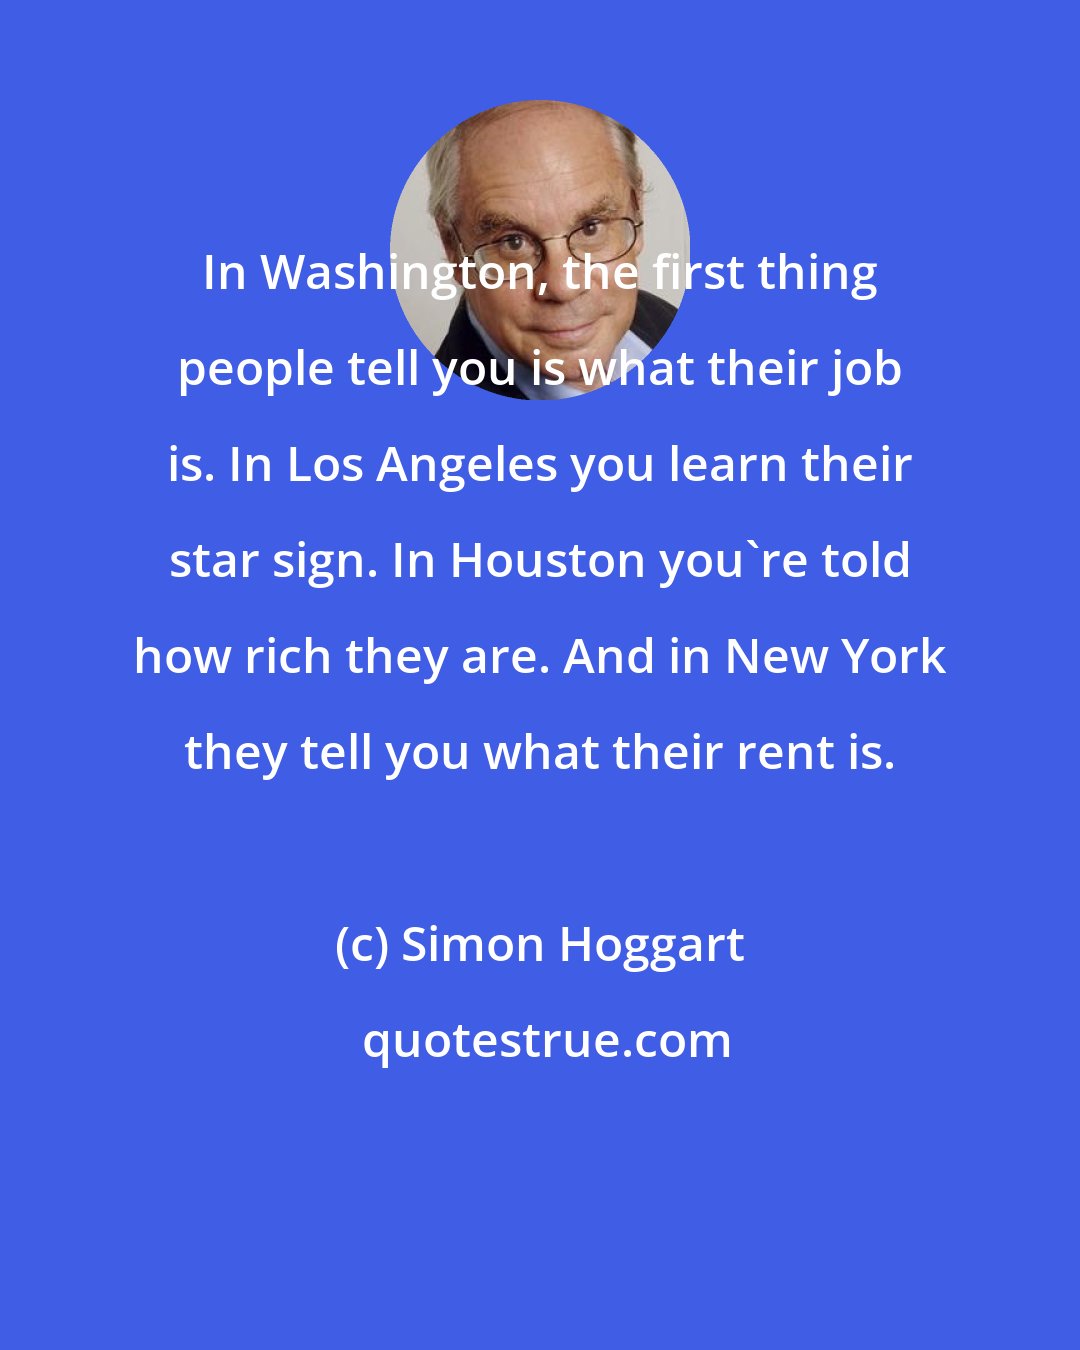 Simon Hoggart: In Washington, the first thing people tell you is what their job is. In Los Angeles you learn their star sign. In Houston you're told how rich they are. And in New York they tell you what their rent is.